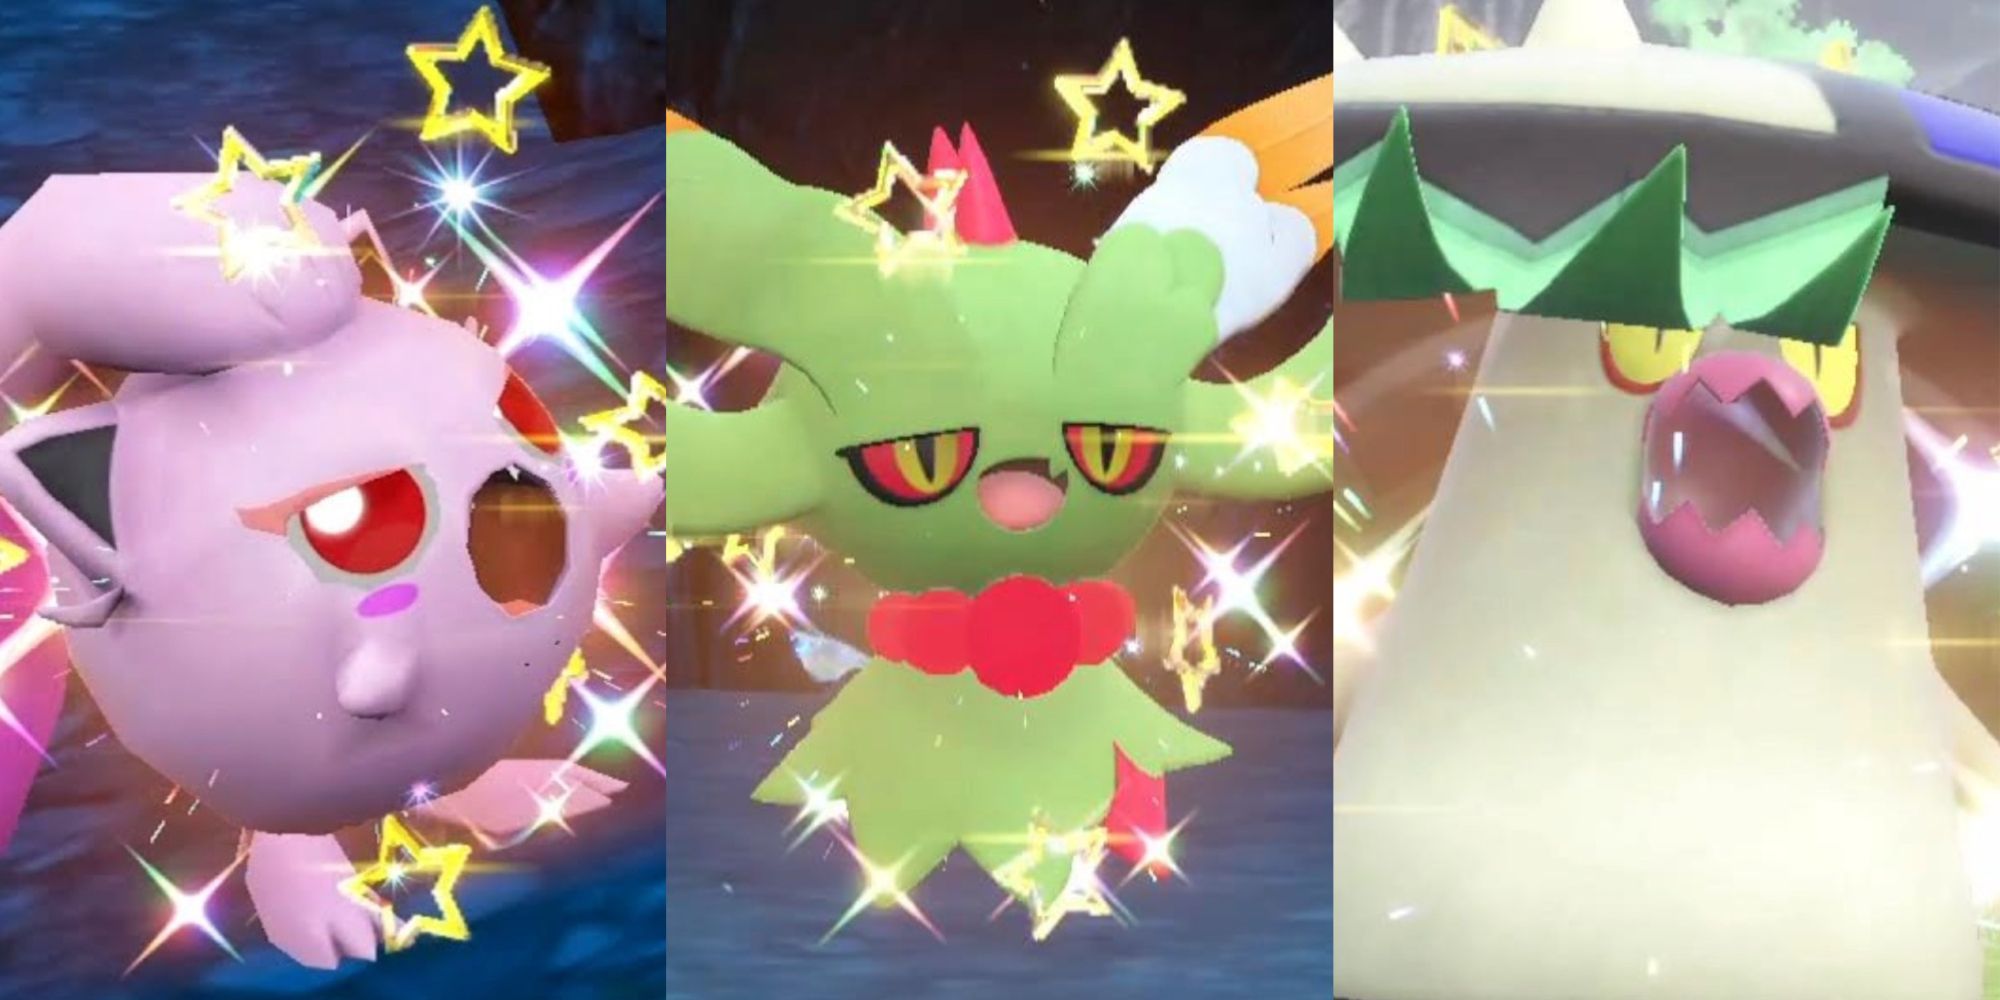 What are the normal and Paradox exclusives for Pokemon Scarlet and Violet?